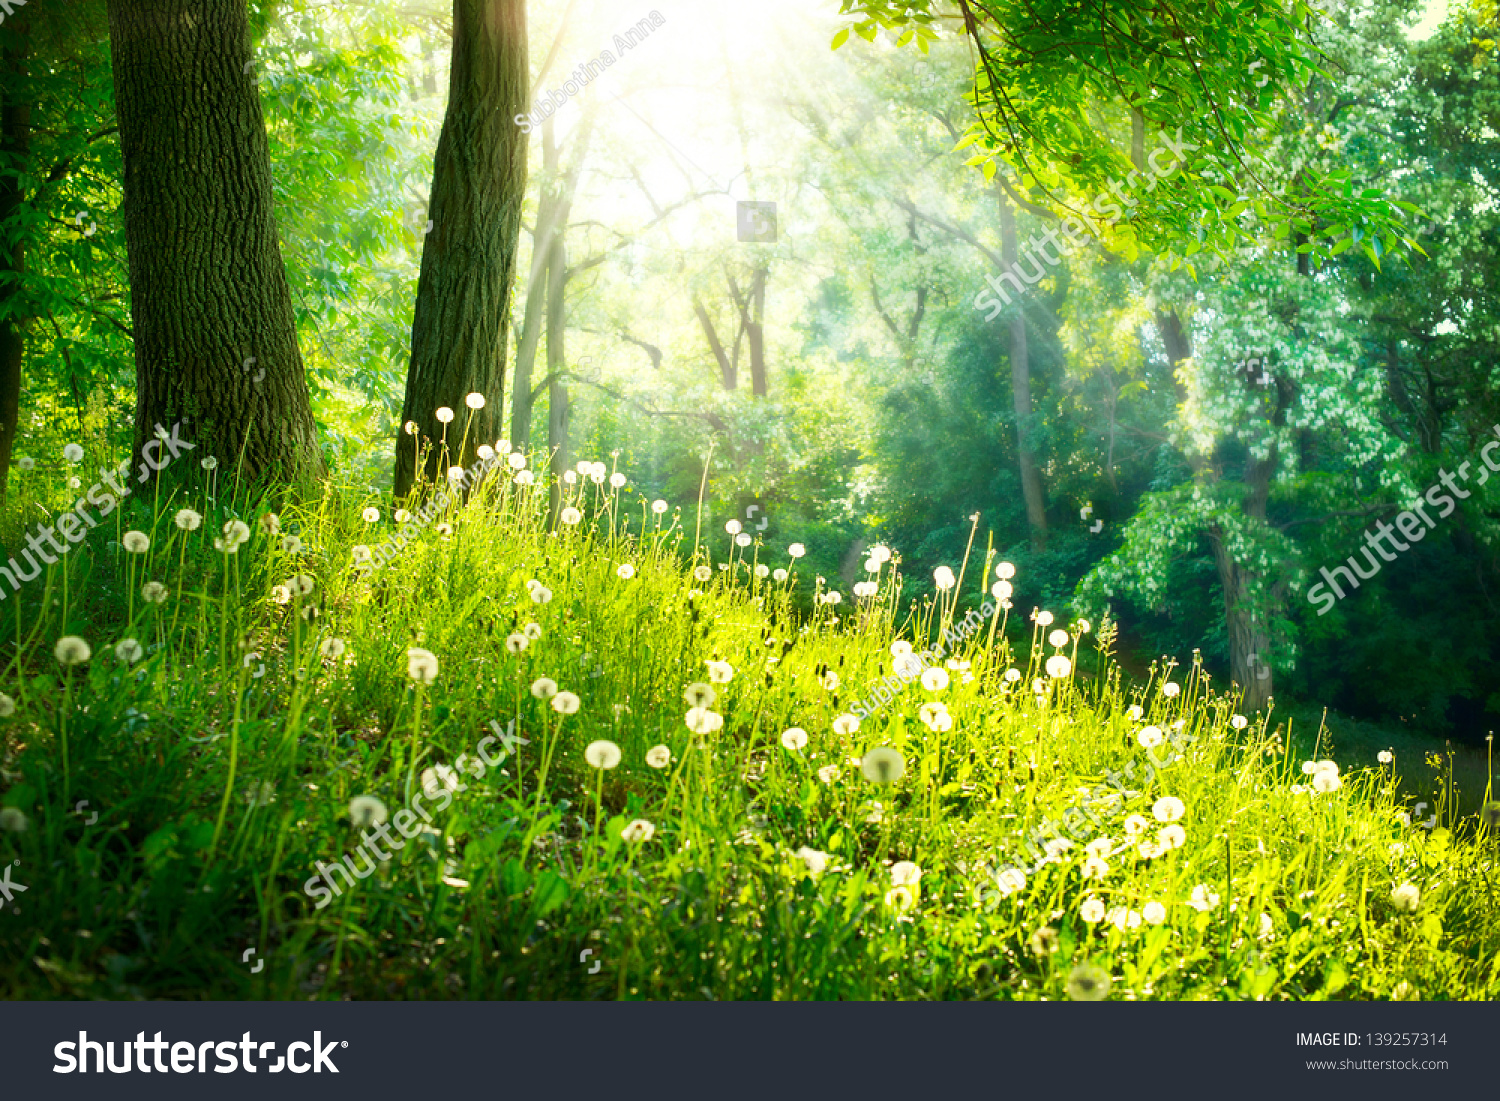 nature photography clipart - photo #39